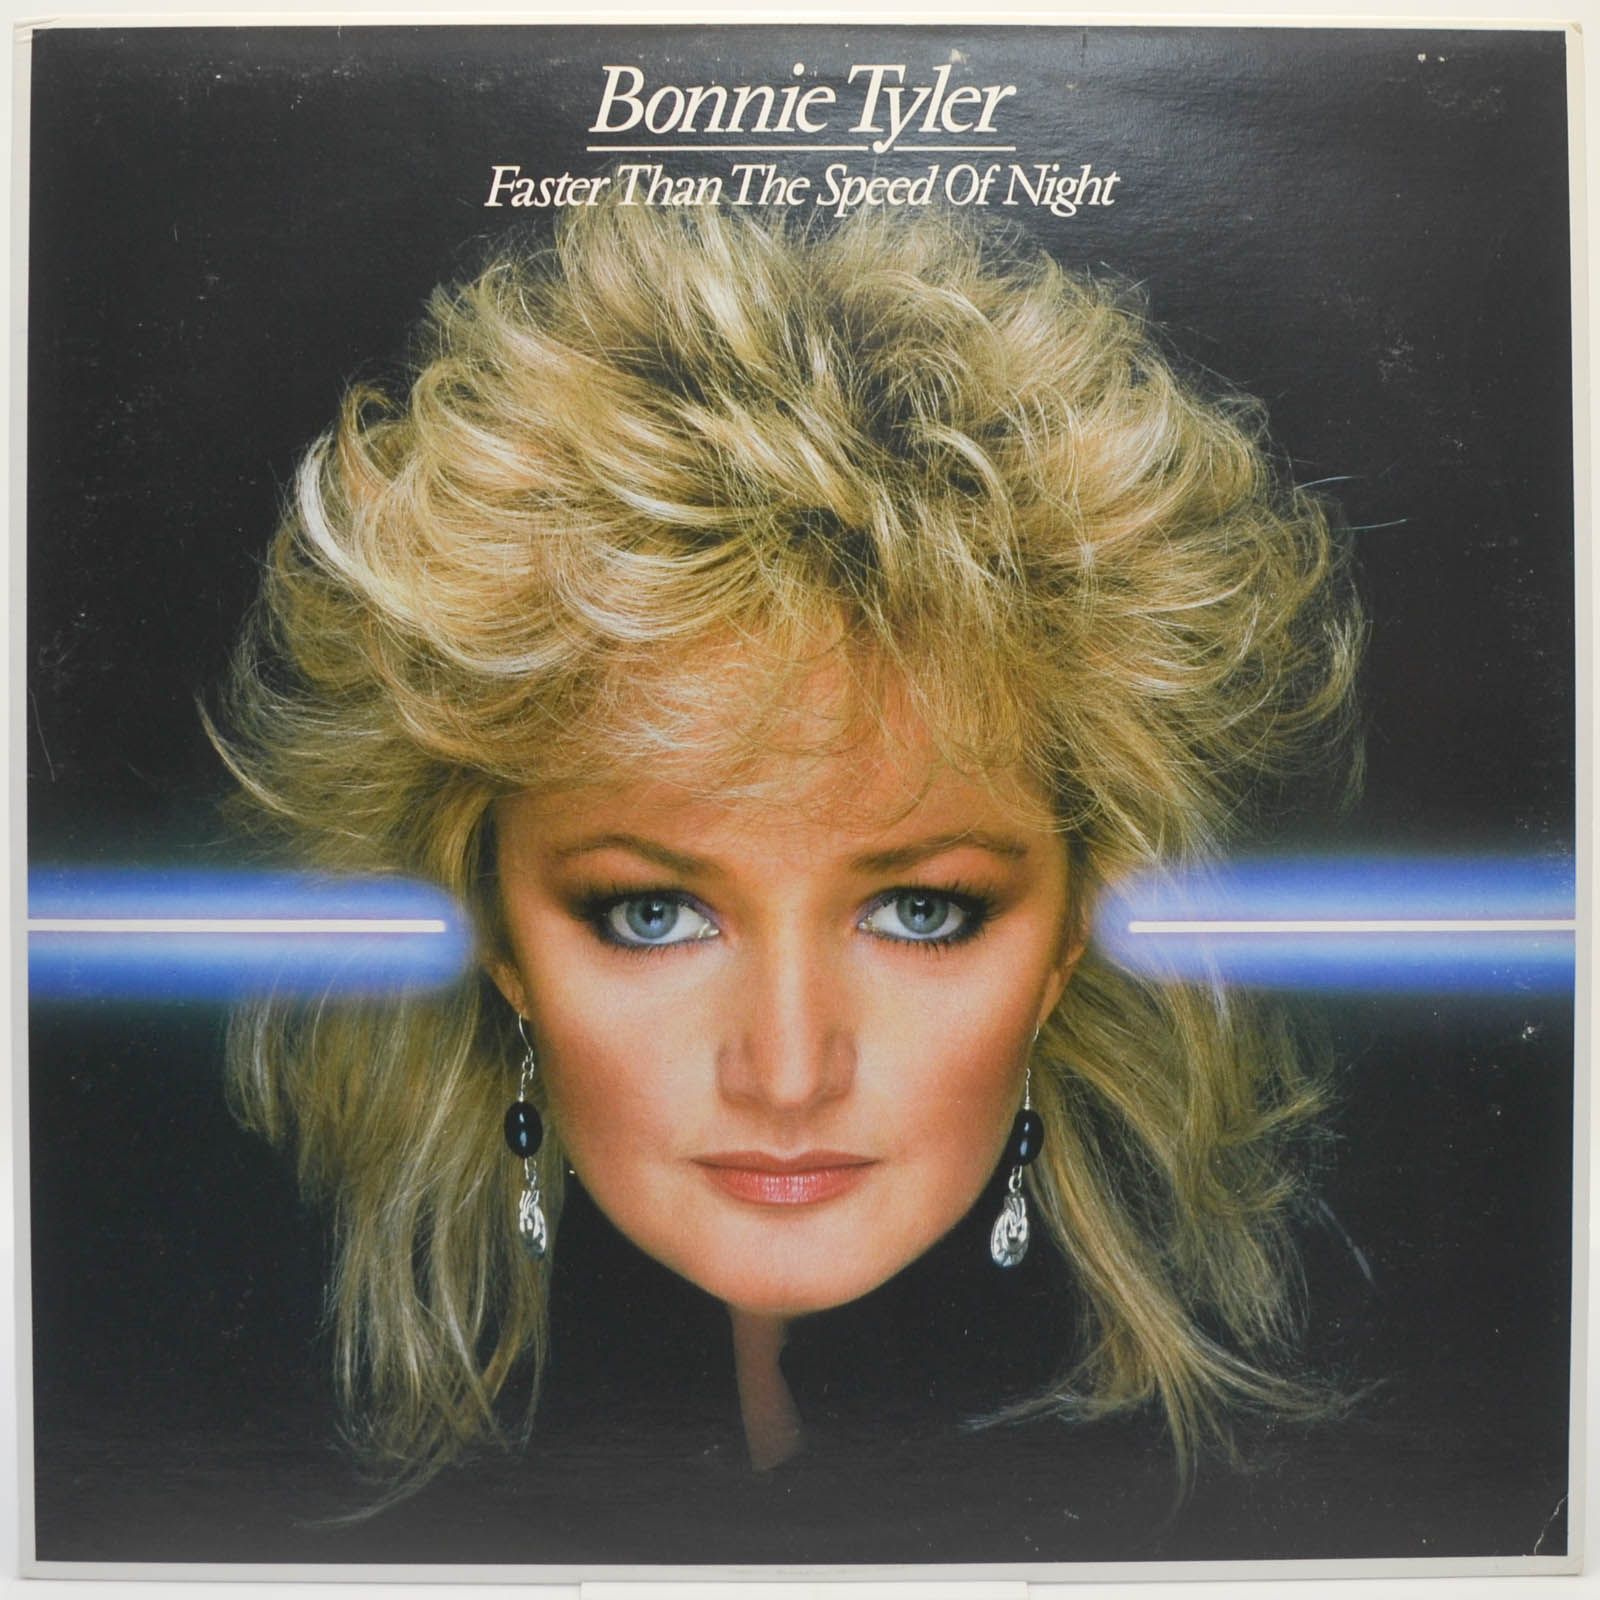 Bonnie Tyler — Faster Than The Speed Of Night, 1983